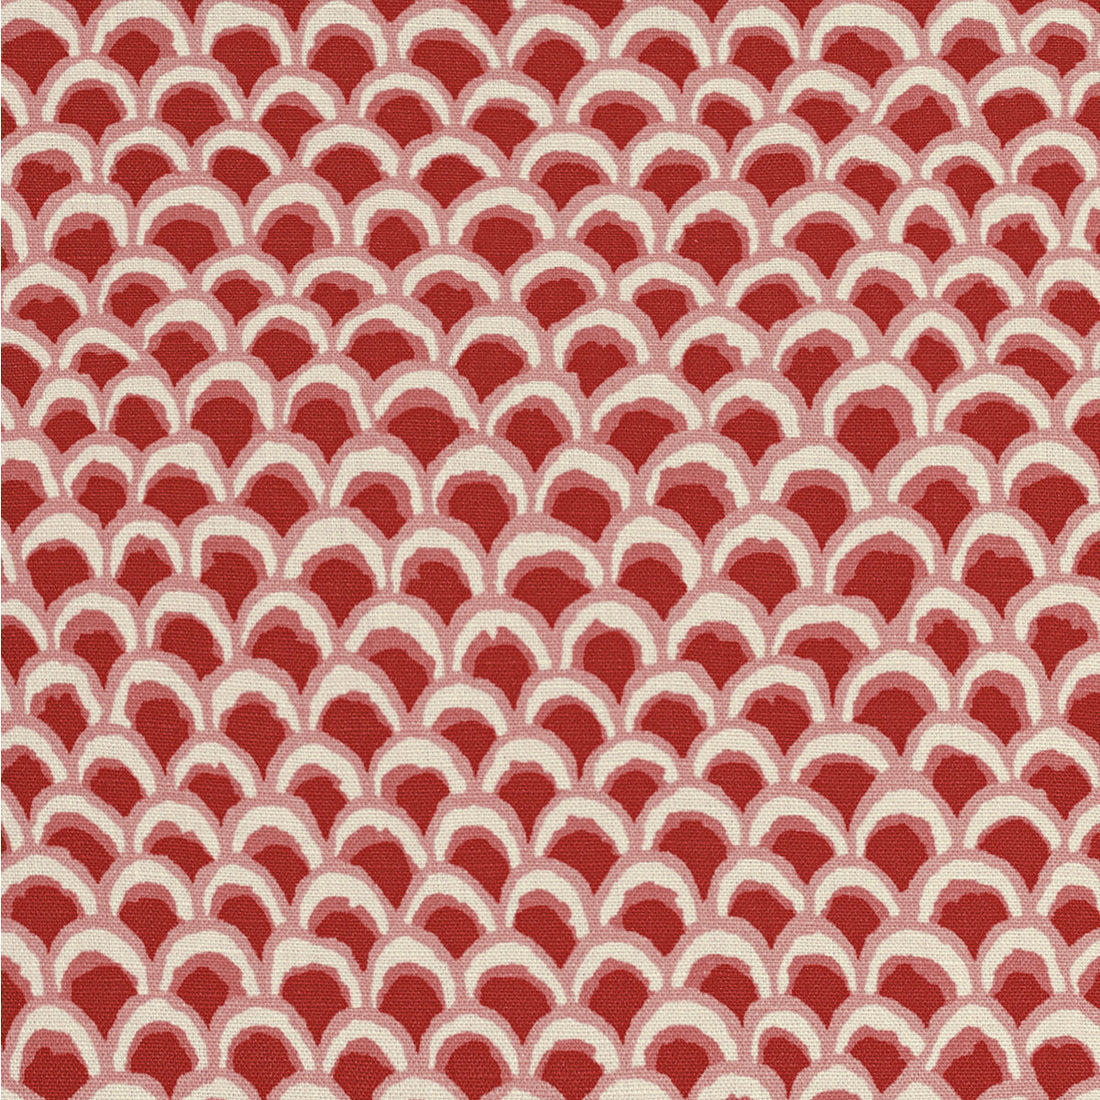 Pave II Print fabric in red color - pattern 8020126.19.0 - by Brunschwig &amp; Fils in the Louverne collection